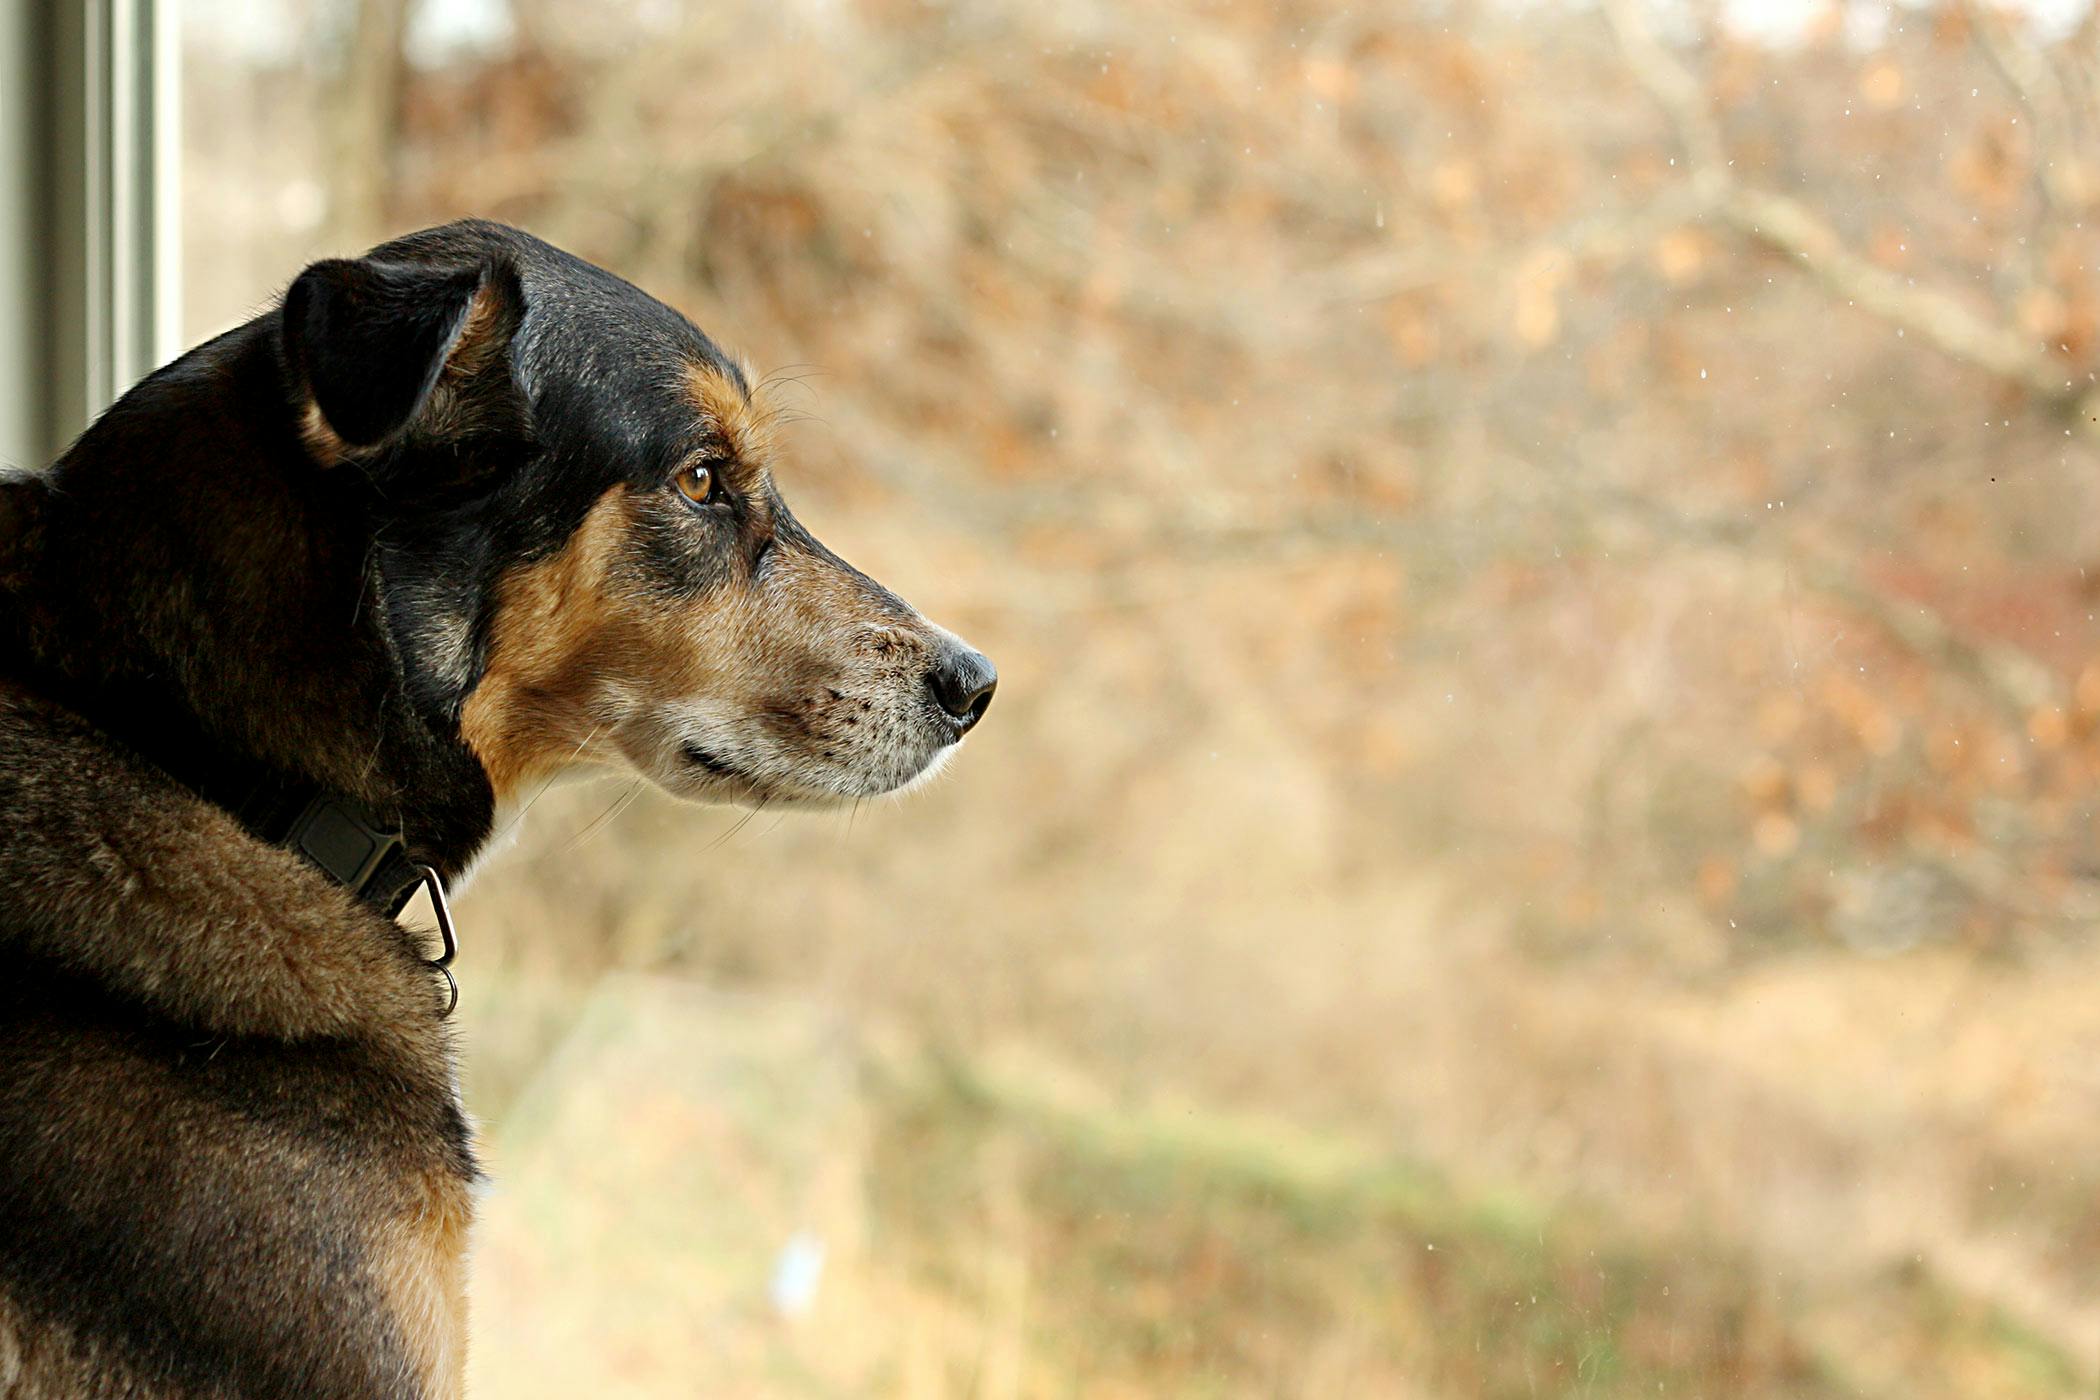 what dog breeds are prone to anxiety